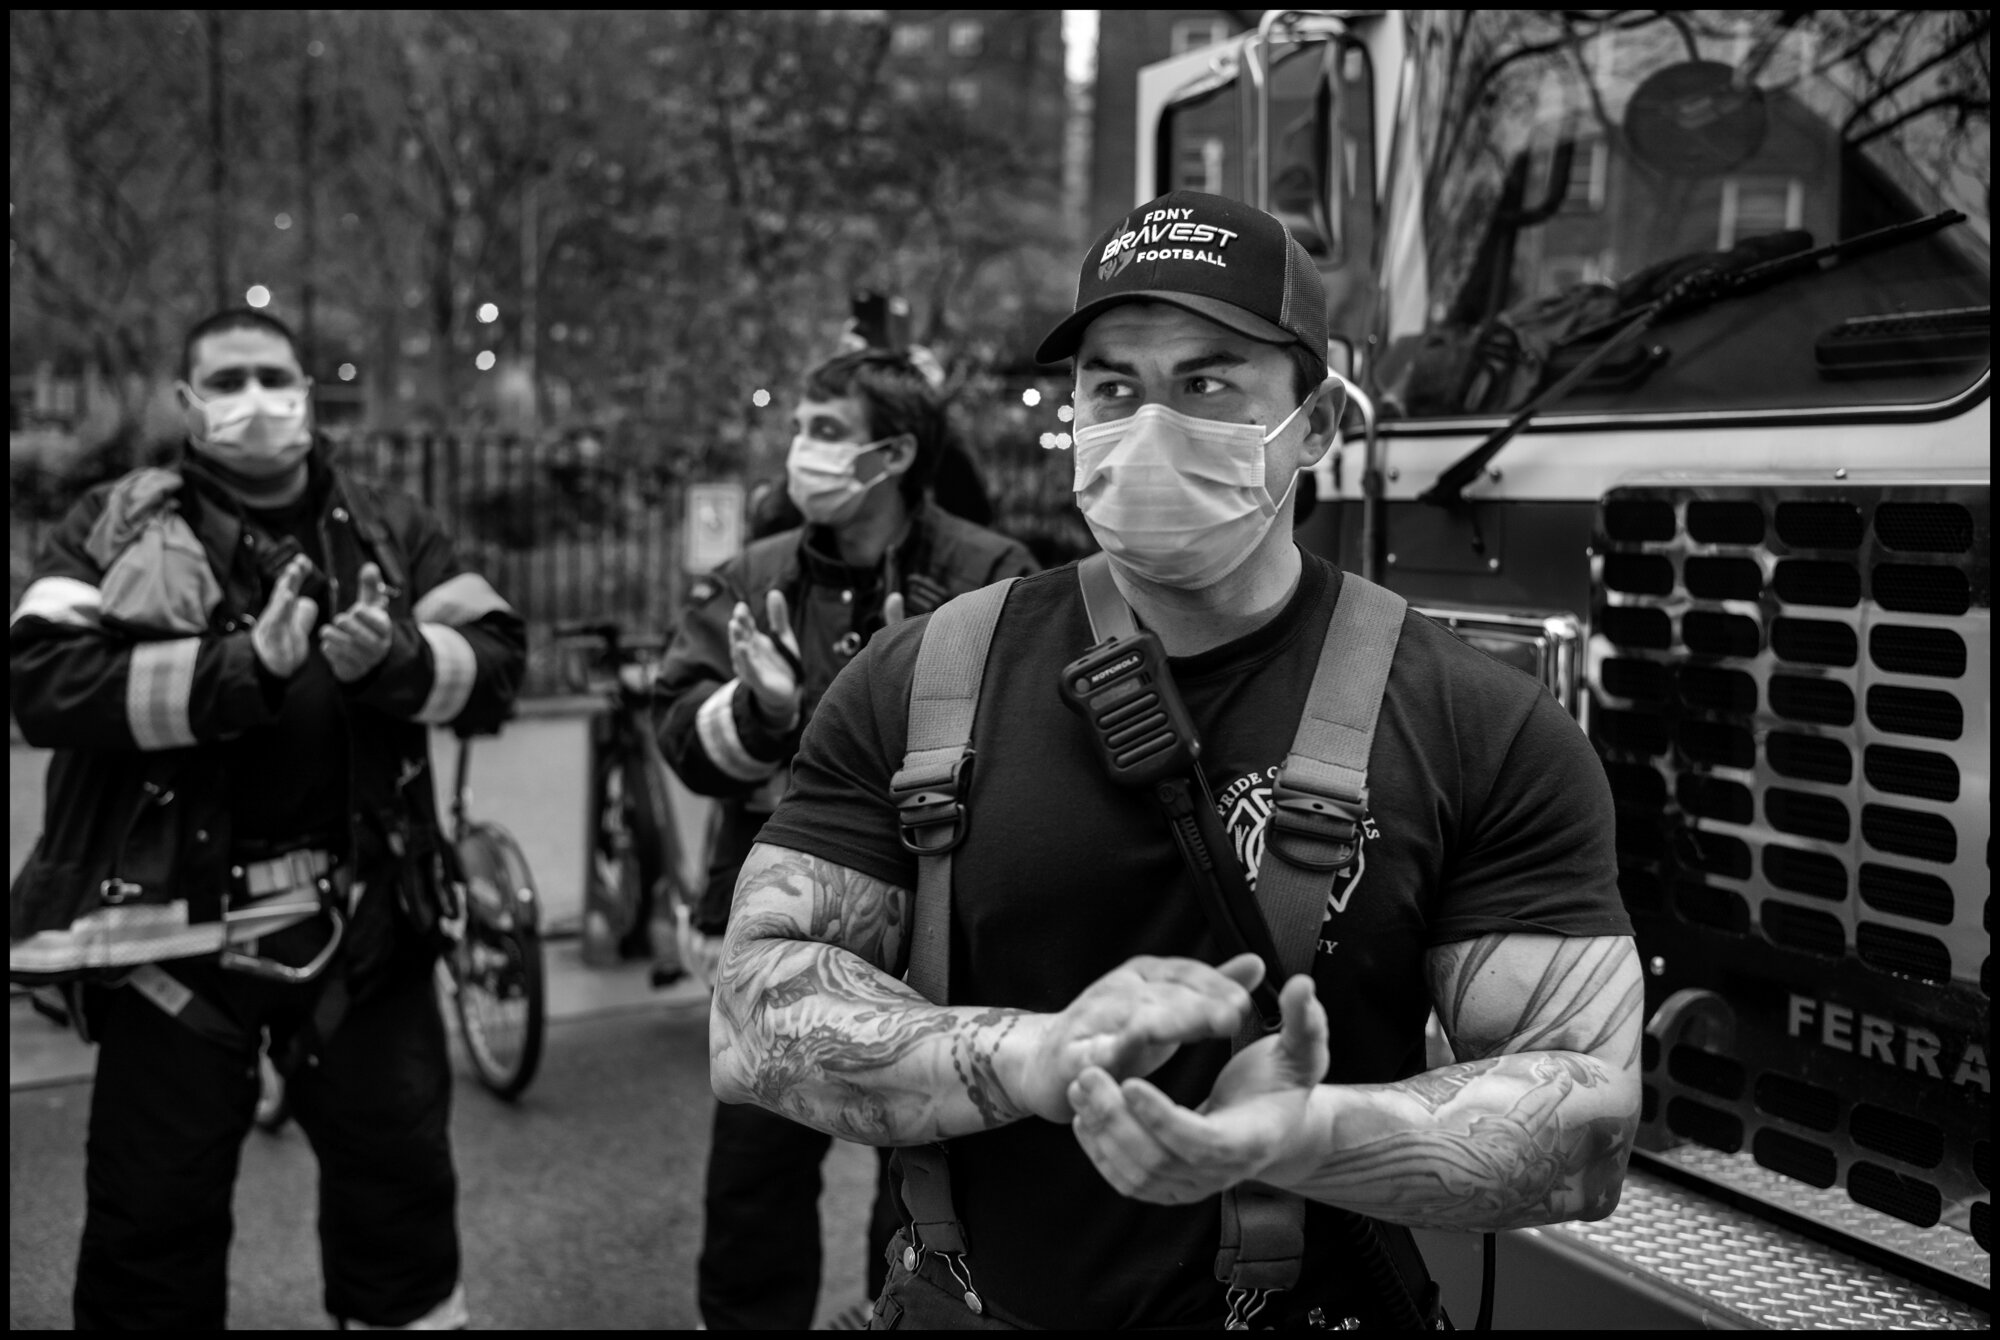  Firemen from with FDNY 43 Truck “El Barrio’s Bravest” stand outside Mount Sinai Hospital and cheer and applaud the work all hospital and essential workers.   April 19, 2020. © Peter Turnley  ID# 26-002 